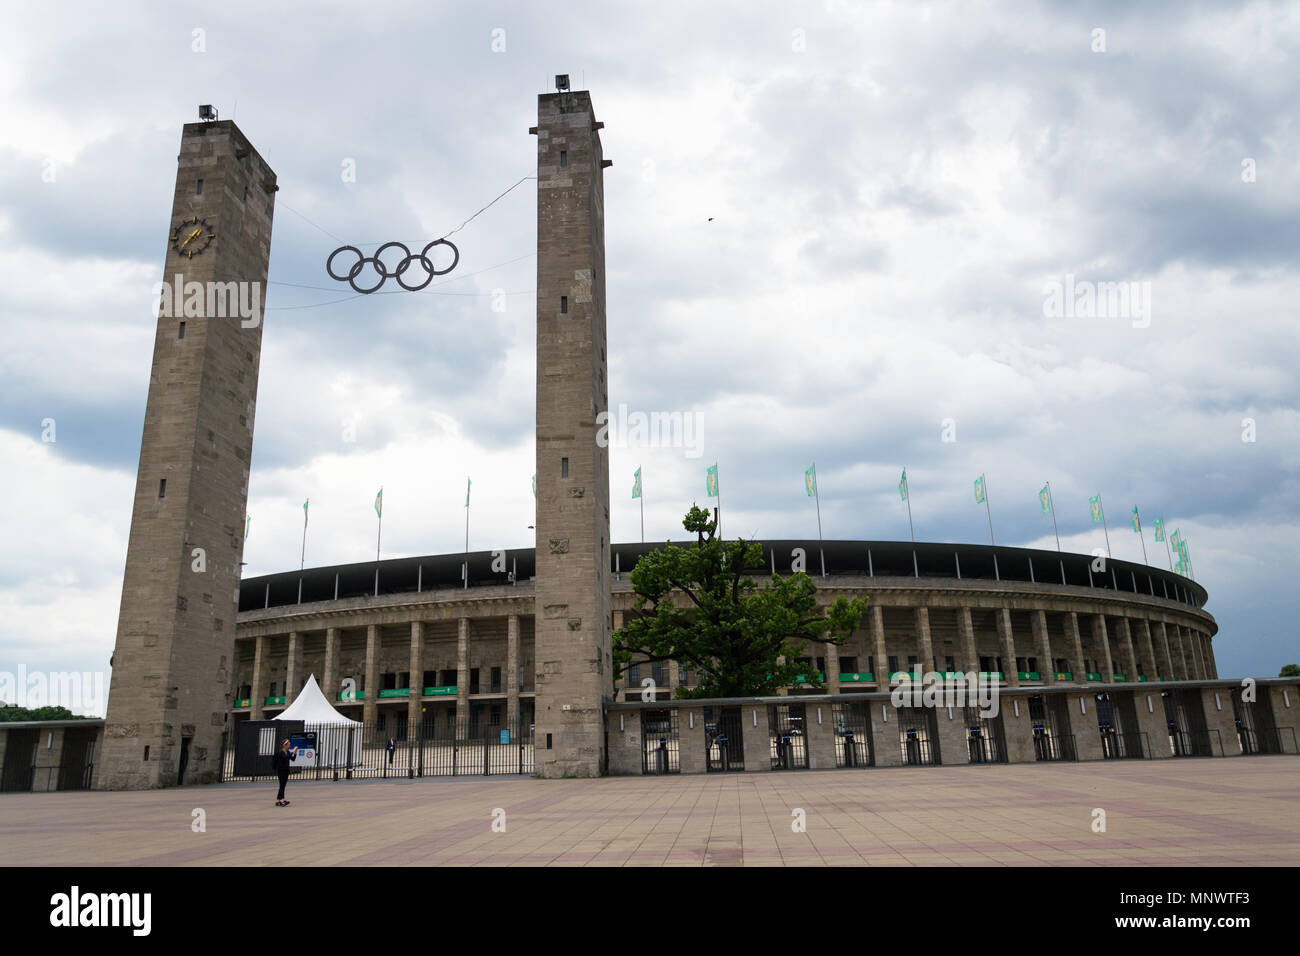 Olympic rings symbol hanging over Olympic stadium in Berlin, Germany Stock Photo